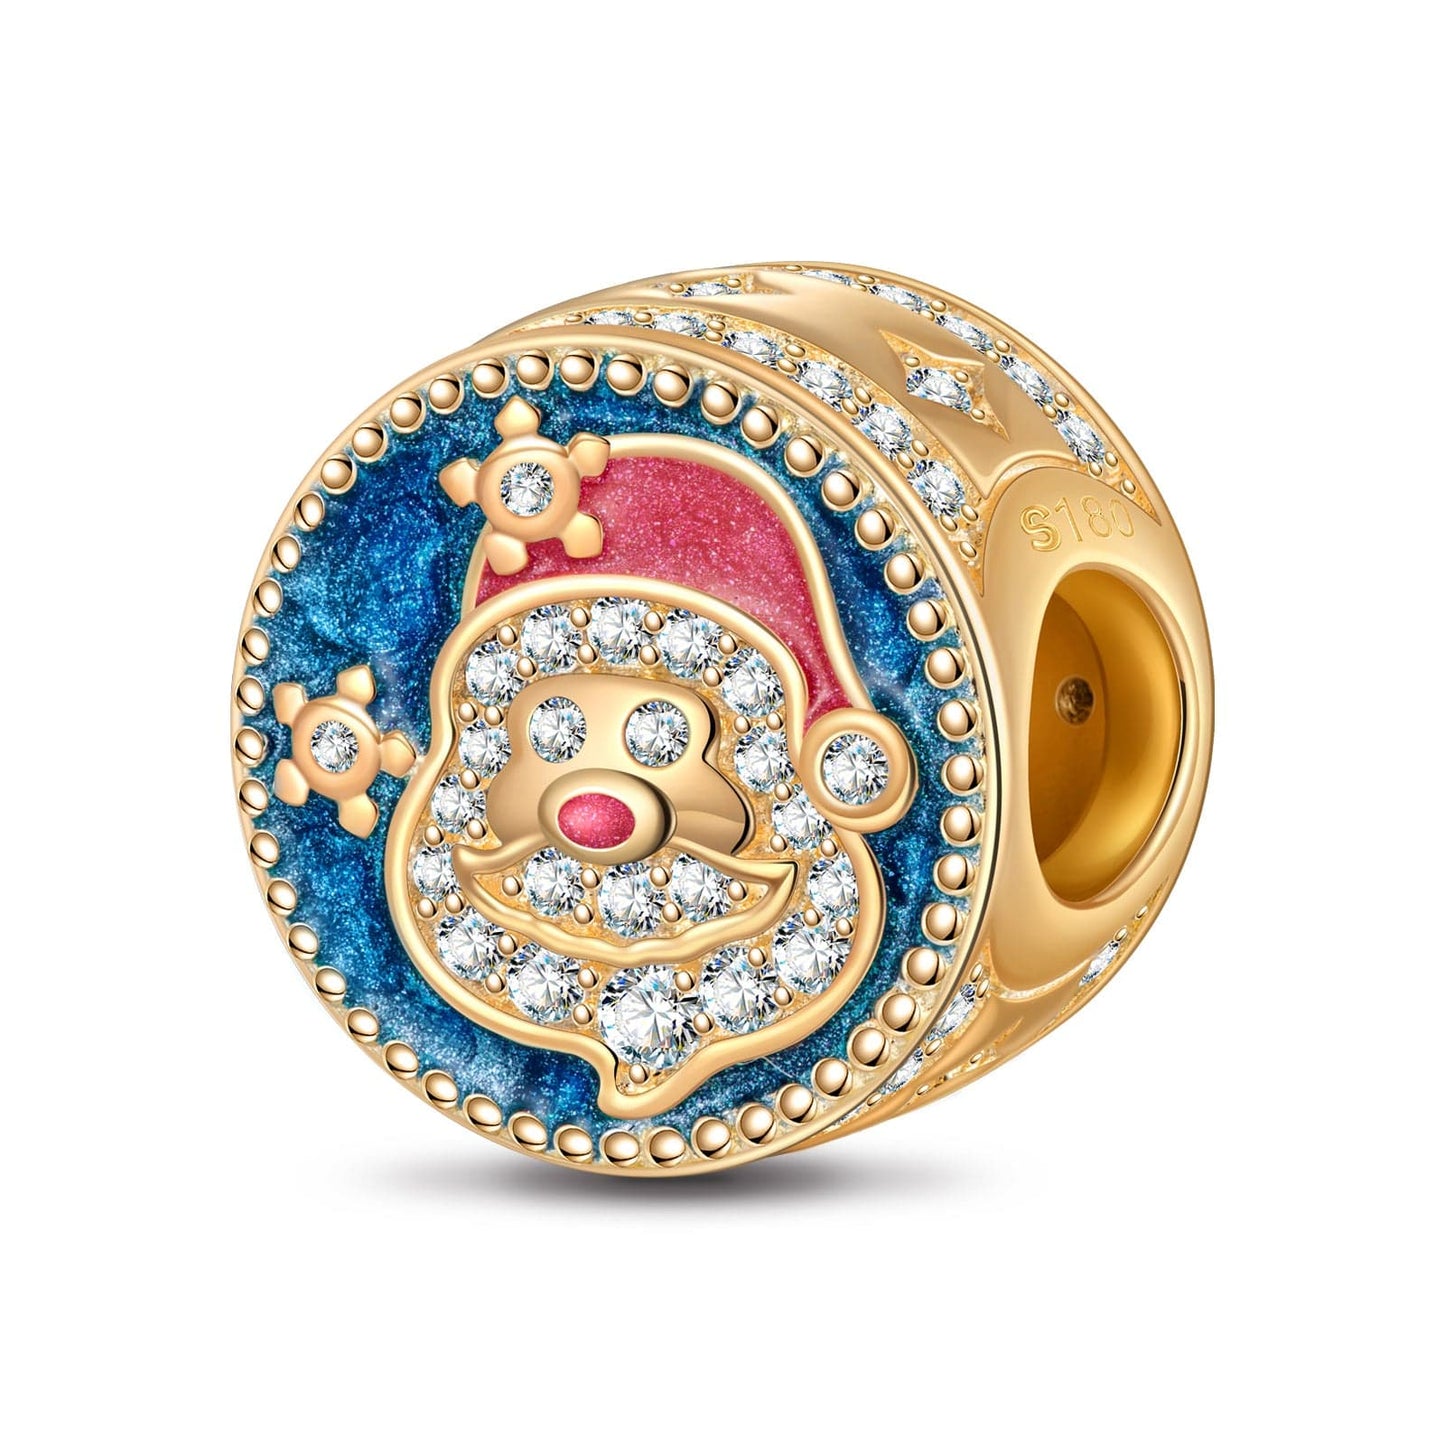 Santa Clause Tarnish-resistant Silver Charms With Enamel In 14K Gold Plated